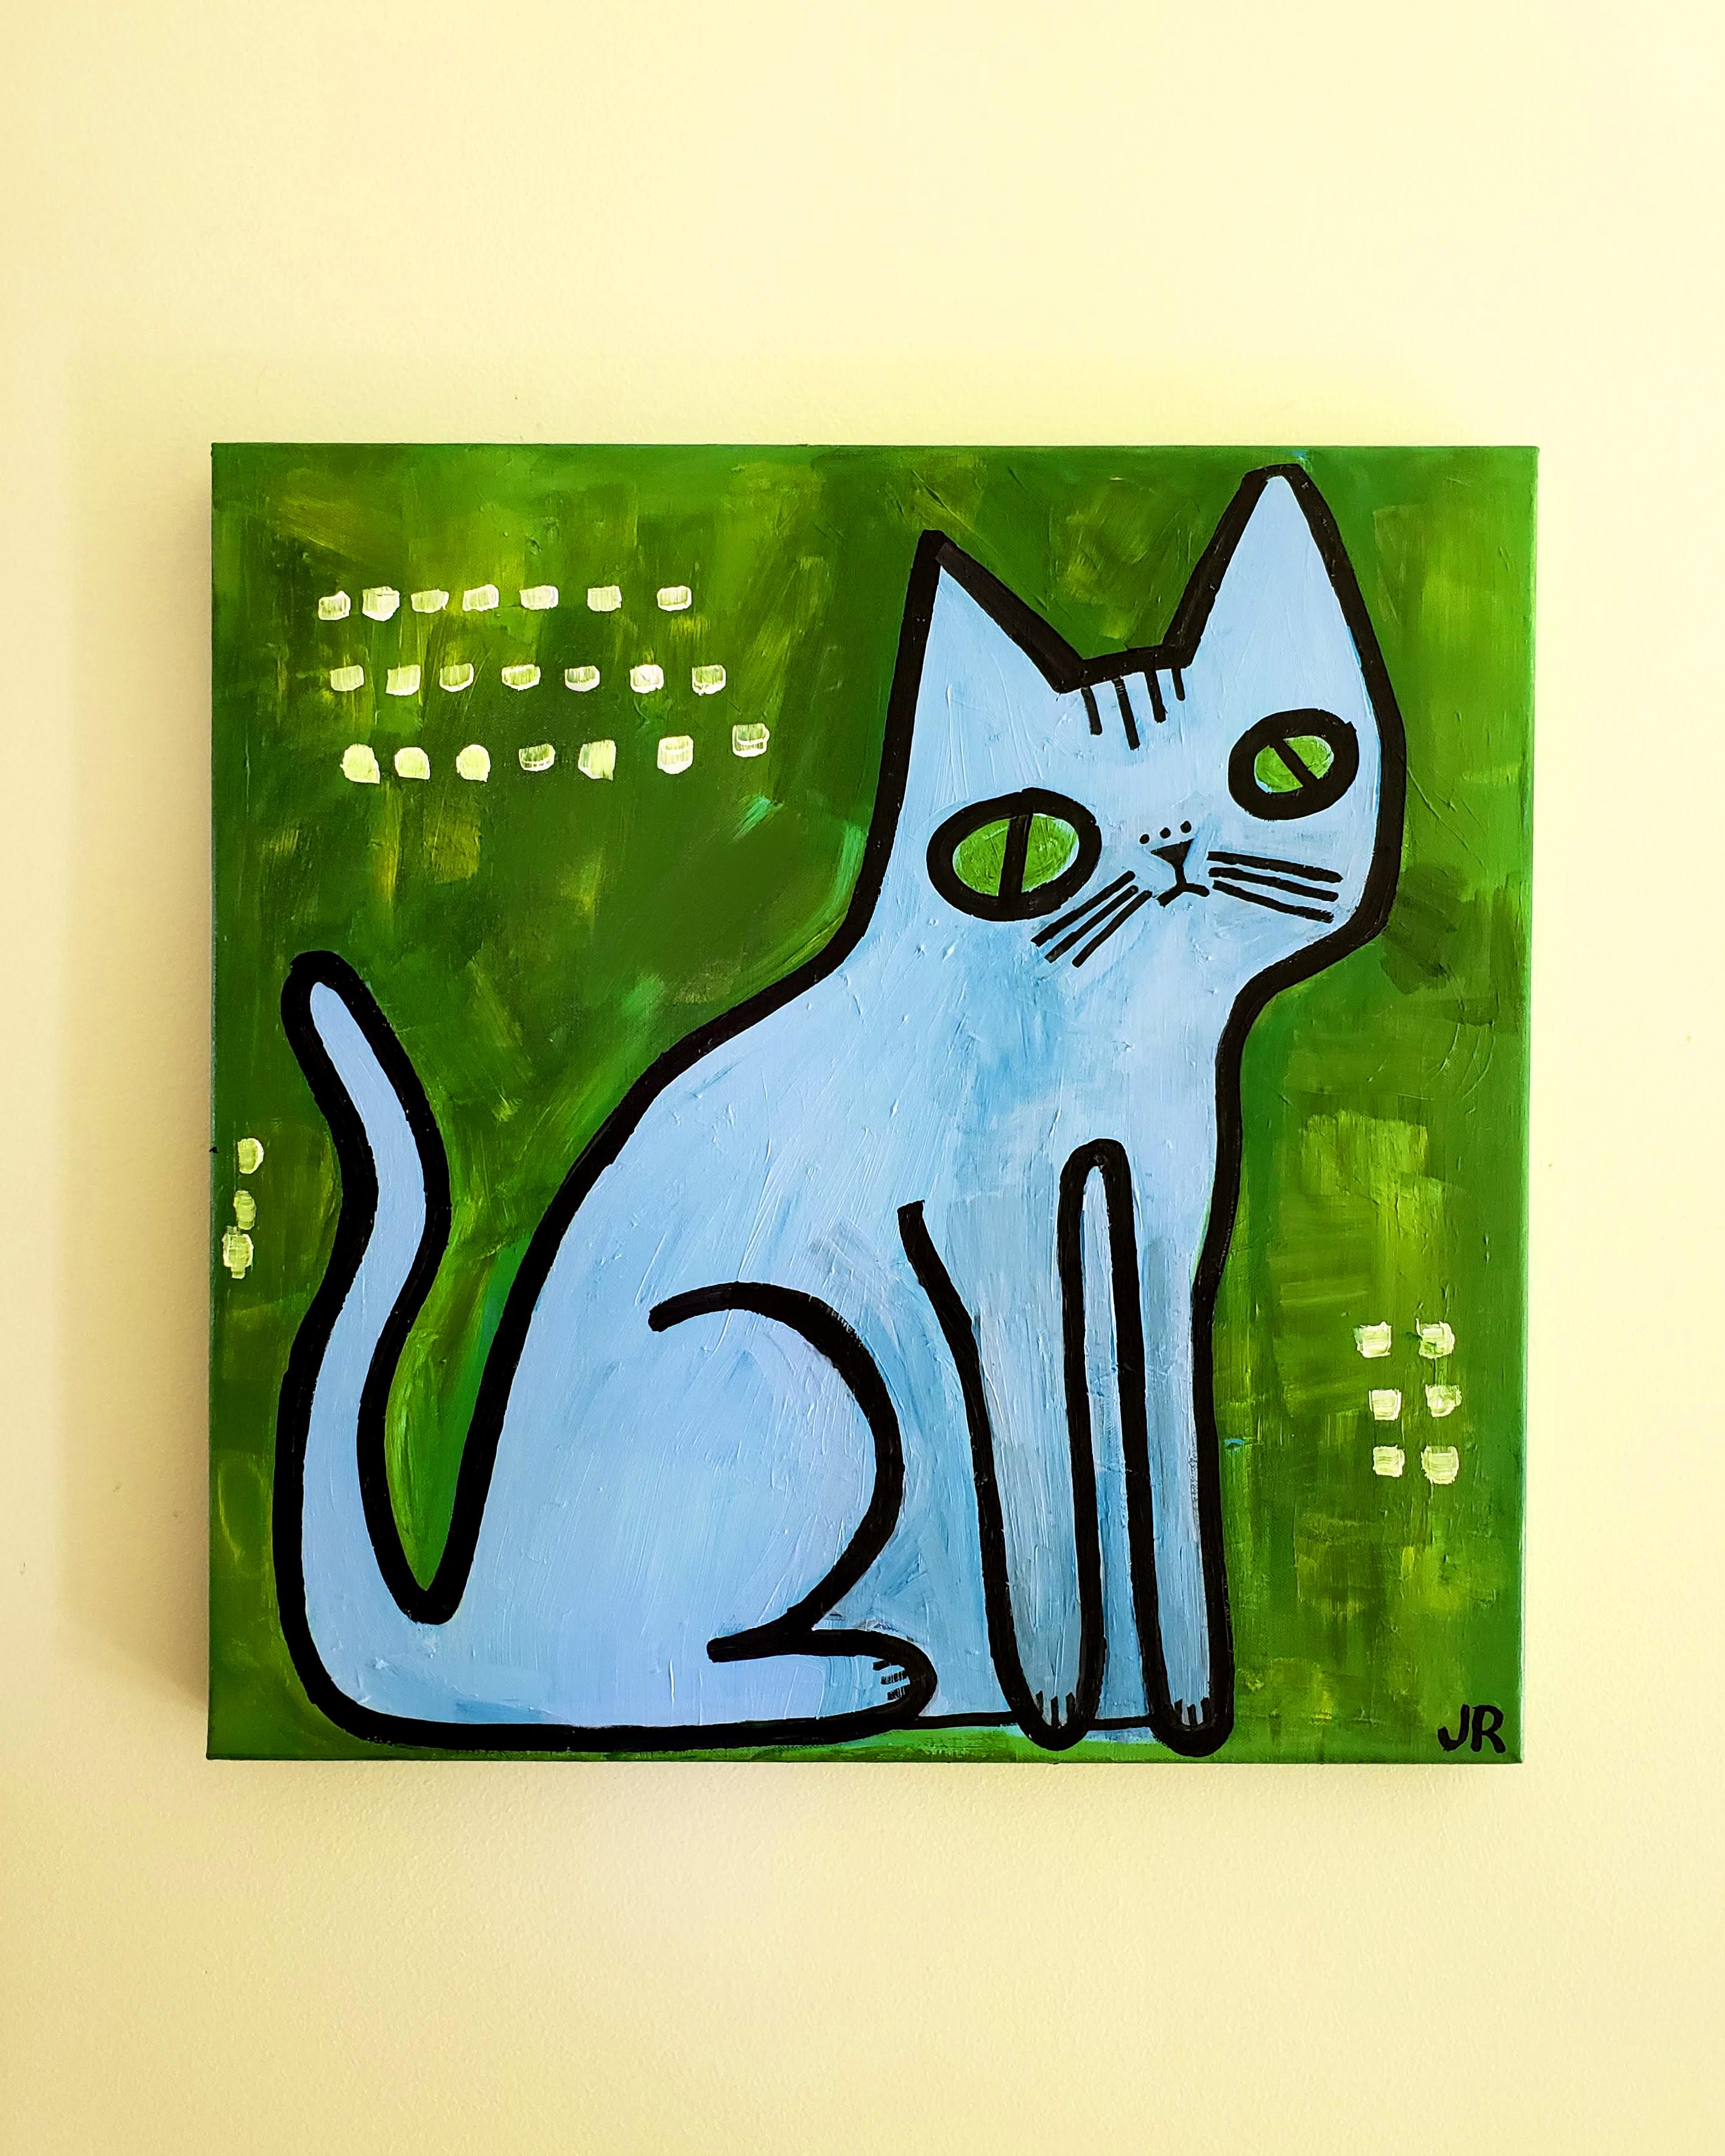 <p>Artist Comments<br>When I started painting 15 years ago, I primarily painted cats inspired by a pair of new kittens. Currently, one of the kittens is an old, wise cat who inspires me to create forms that are contemplative and